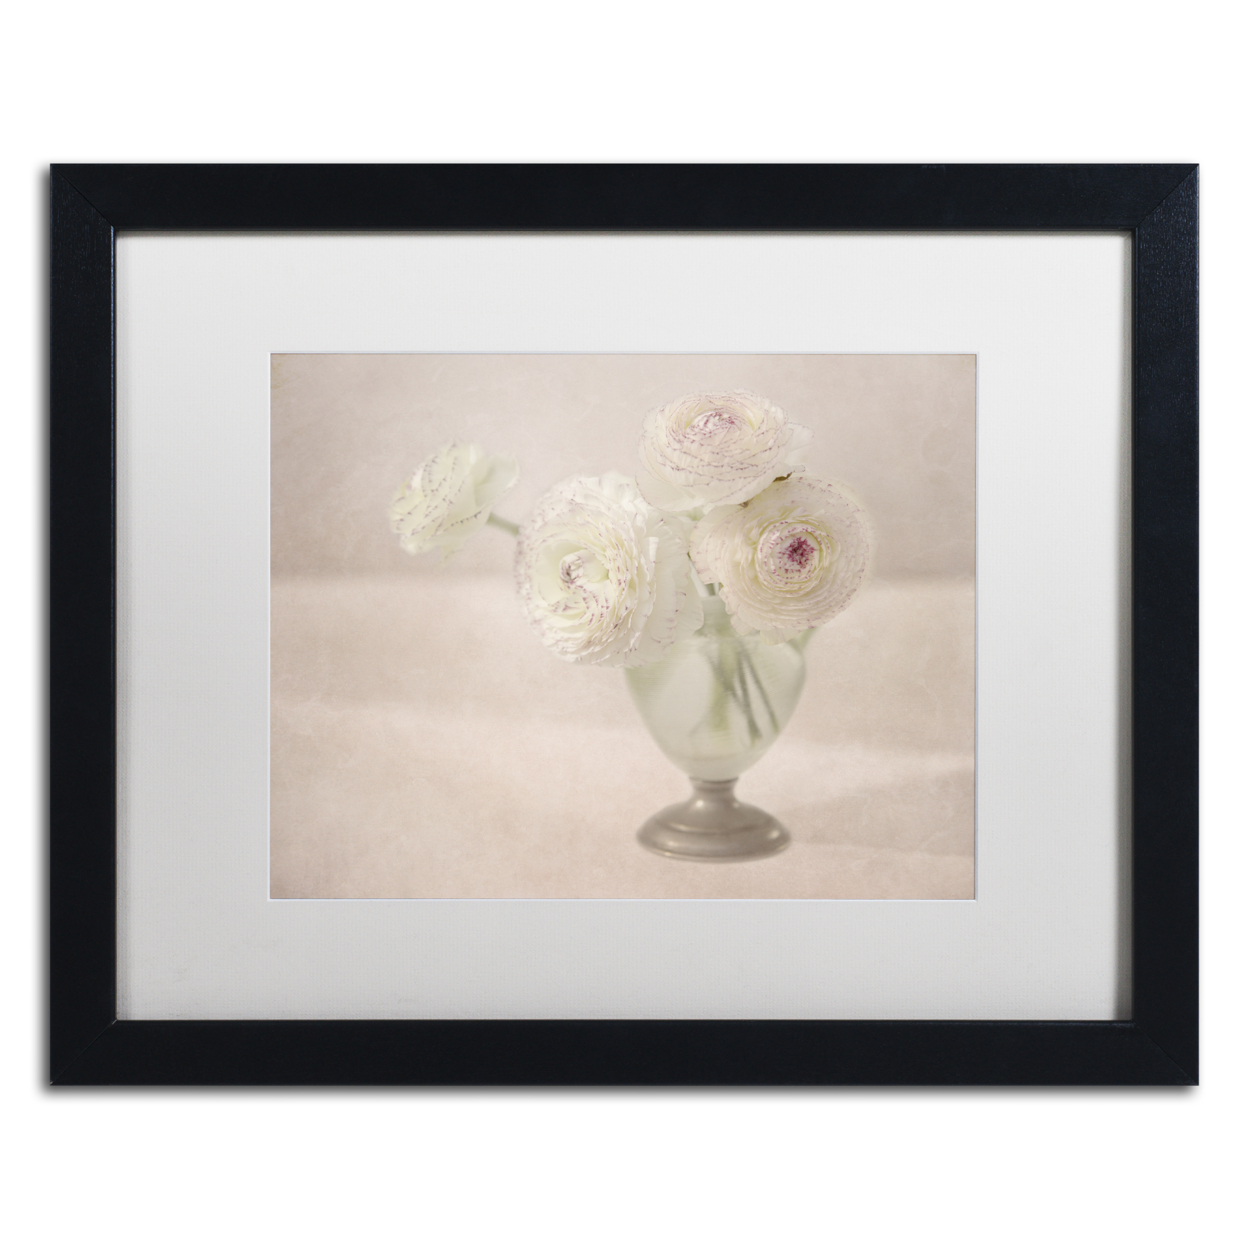 Cora Niele 'White Persian Buttercups Posy' Black Wooden Framed Art 18 X 22 Inches